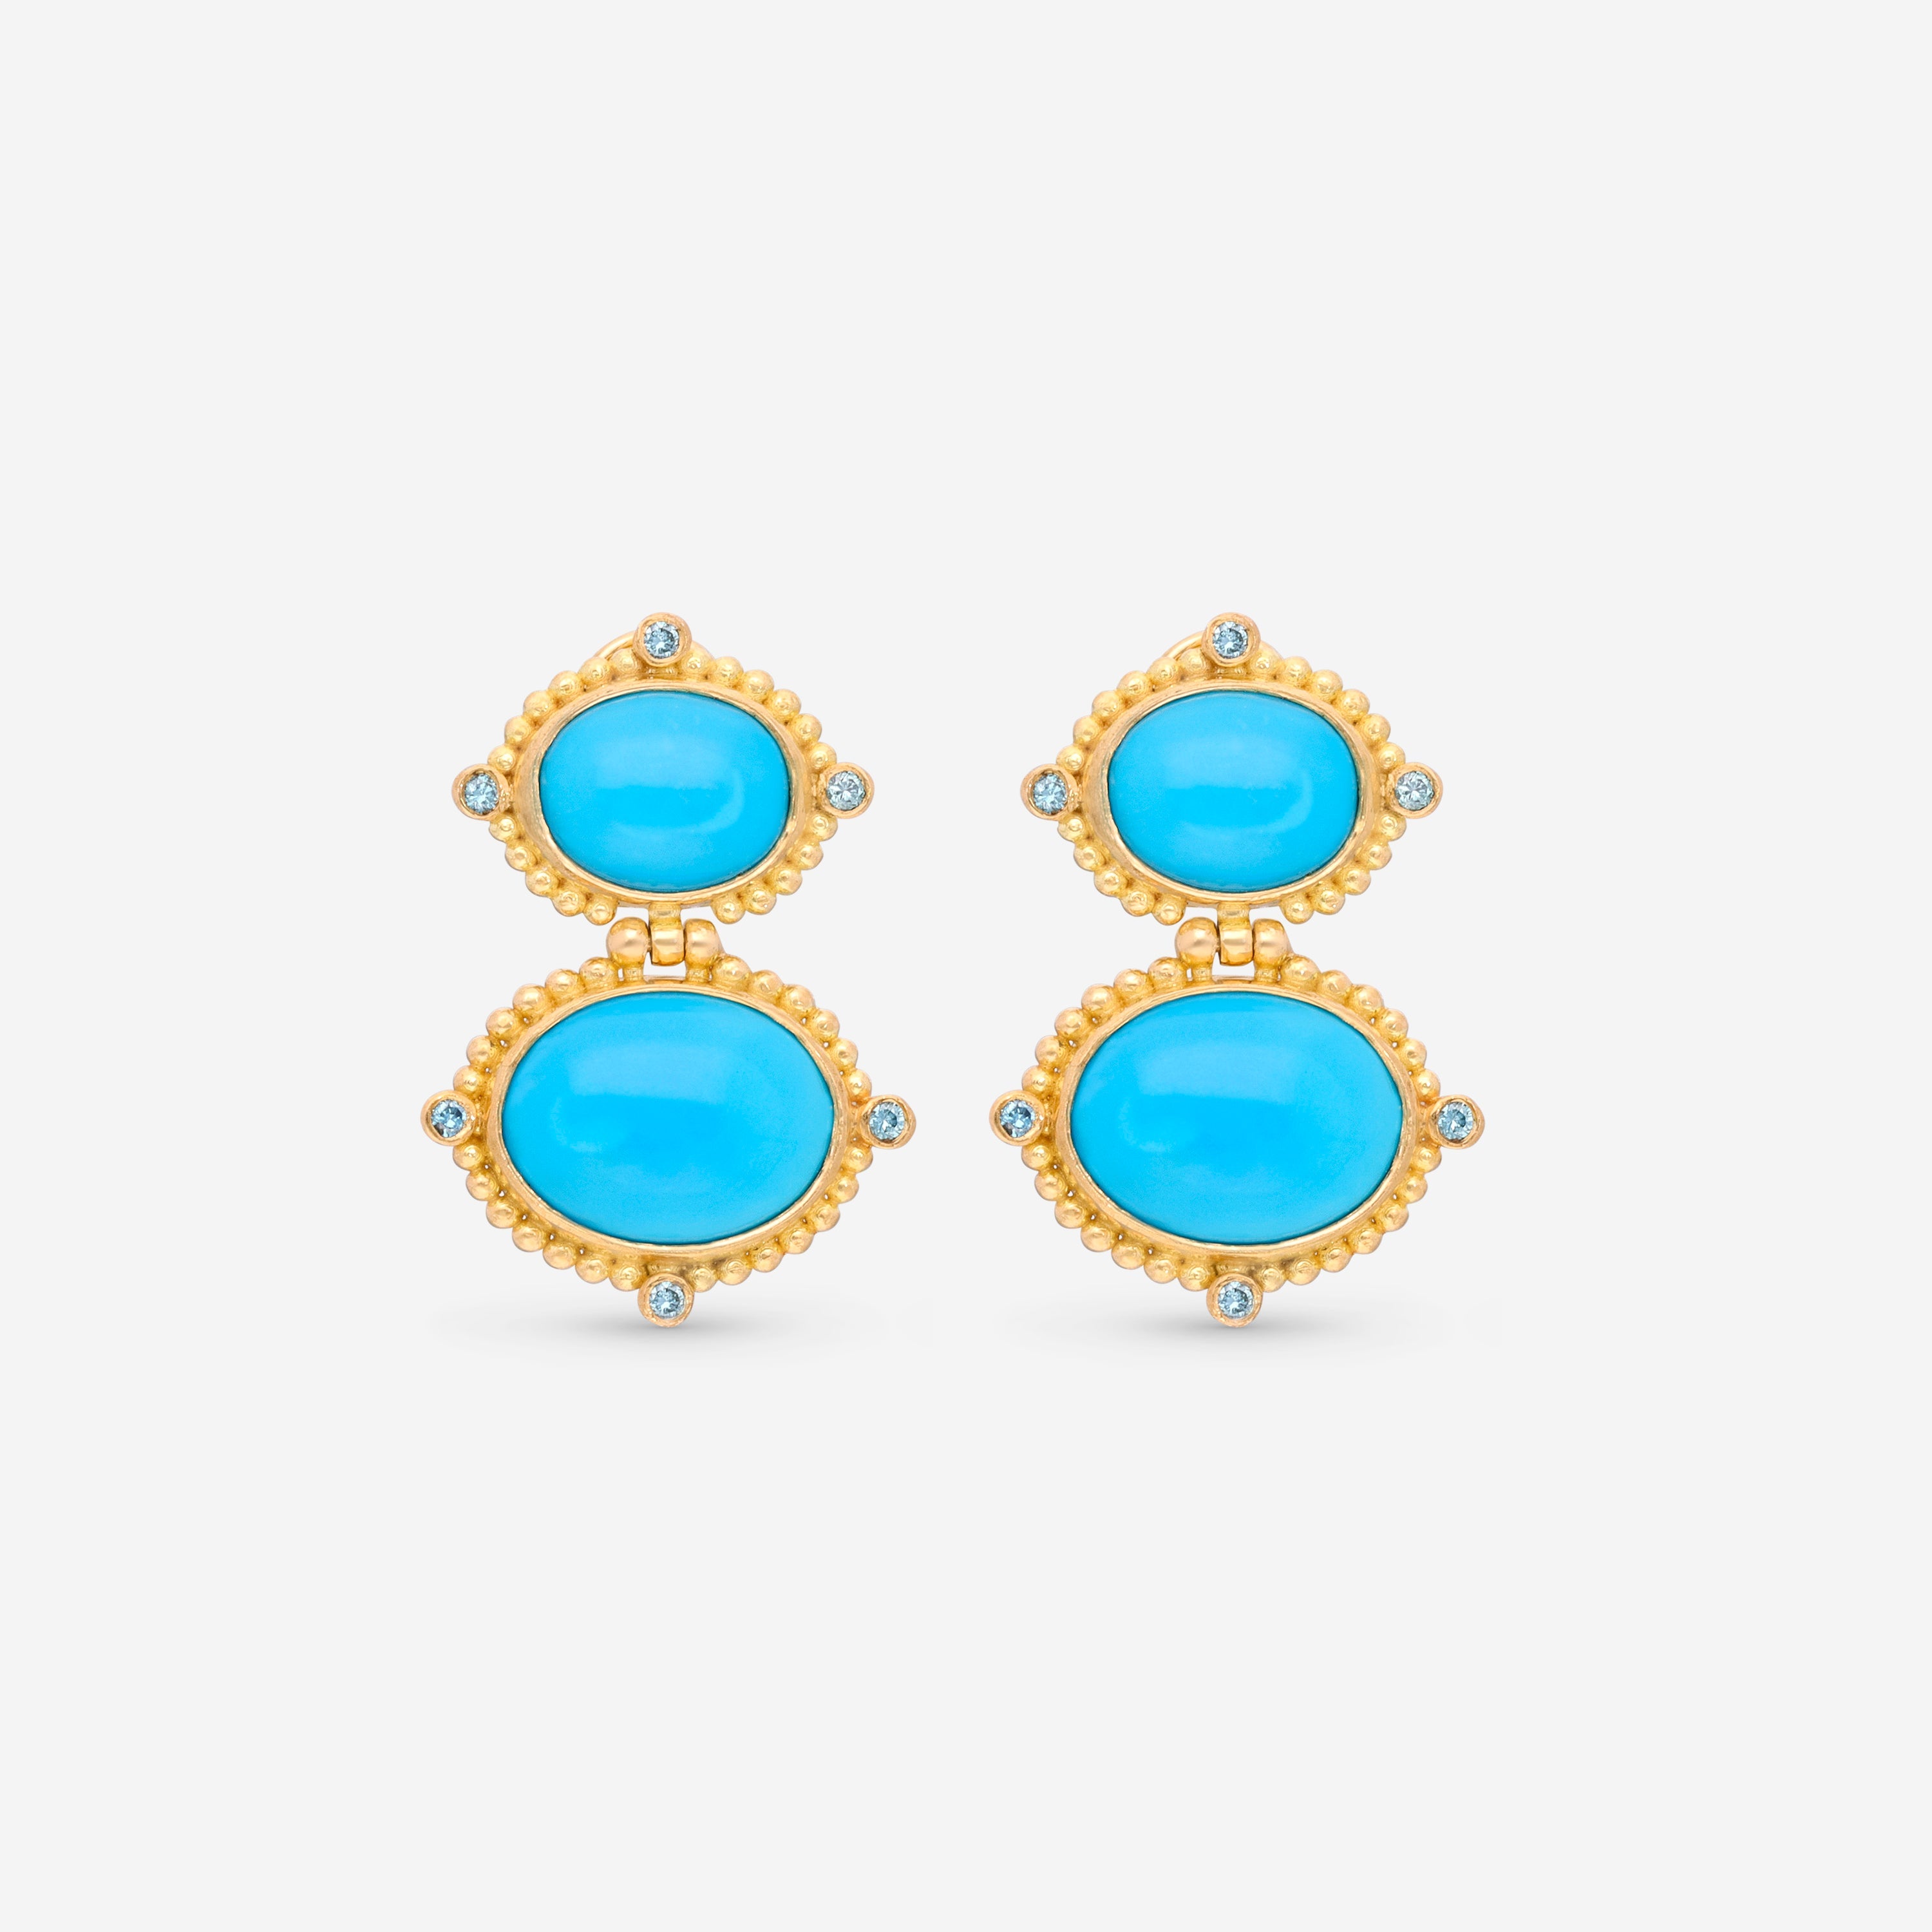 Shop Konstantino Limited 18k Yellow Gold, Turquoise And Blue Diamond Earrings Skmk03121-18kt-470